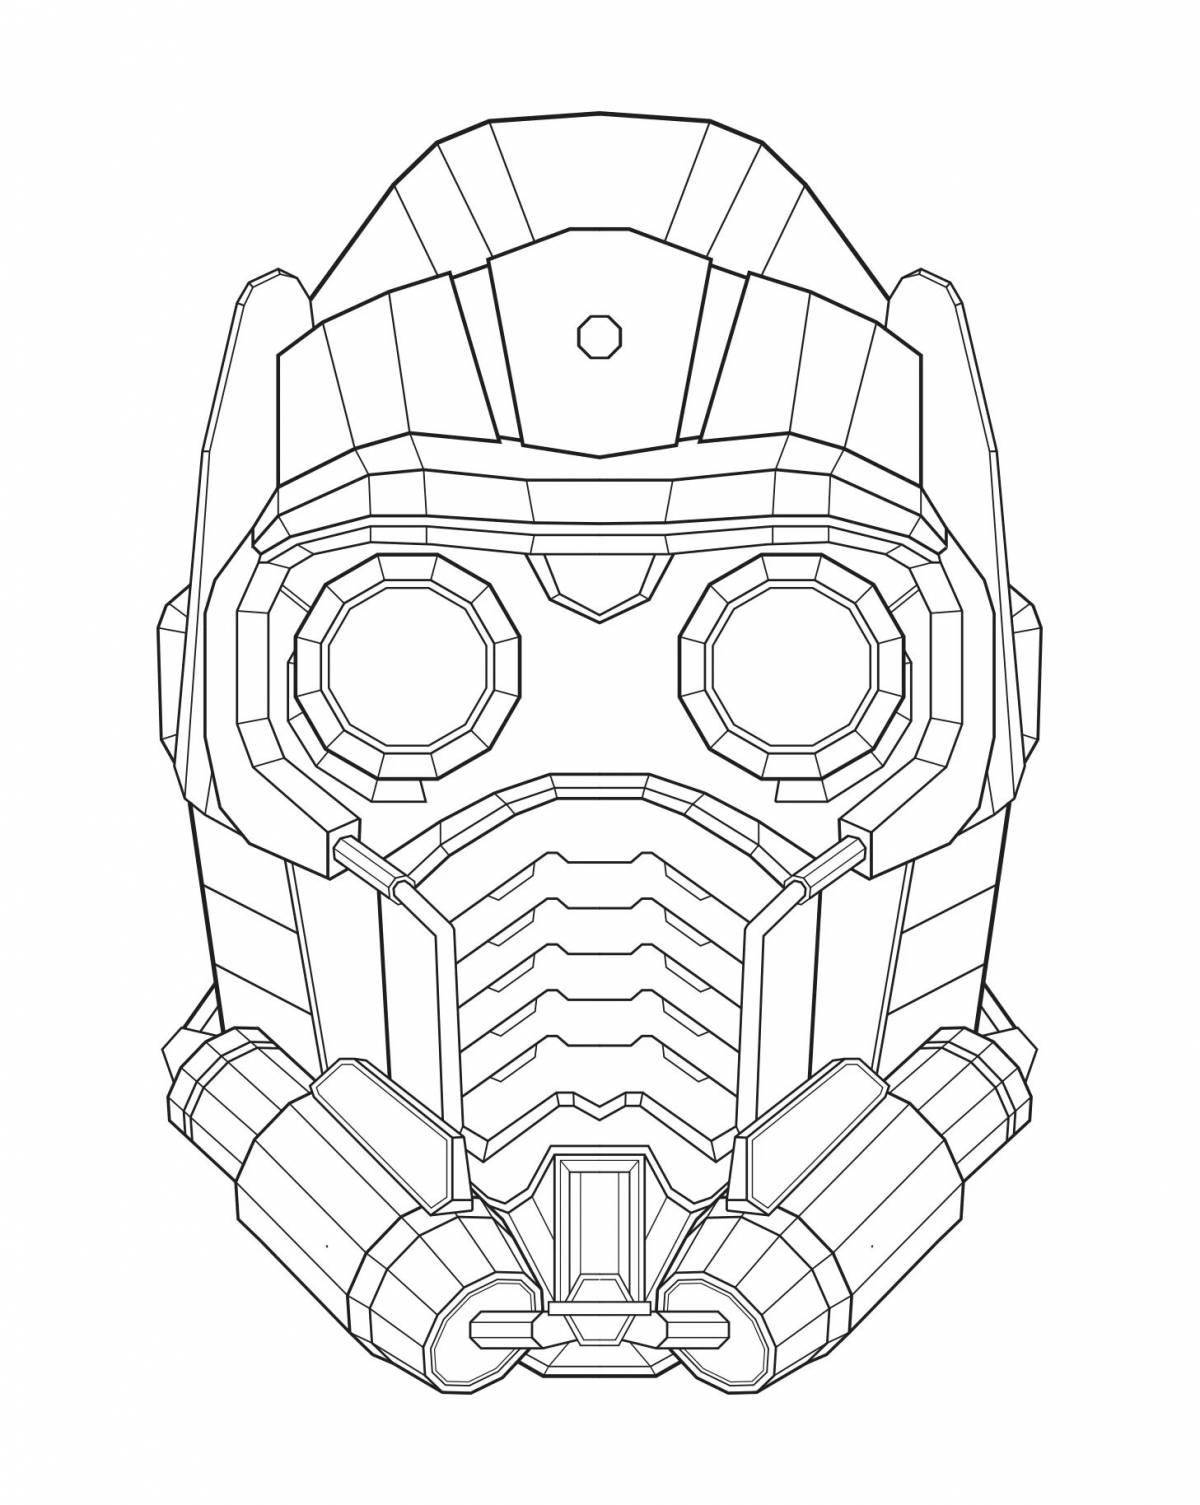 Coloring book amazing star lord